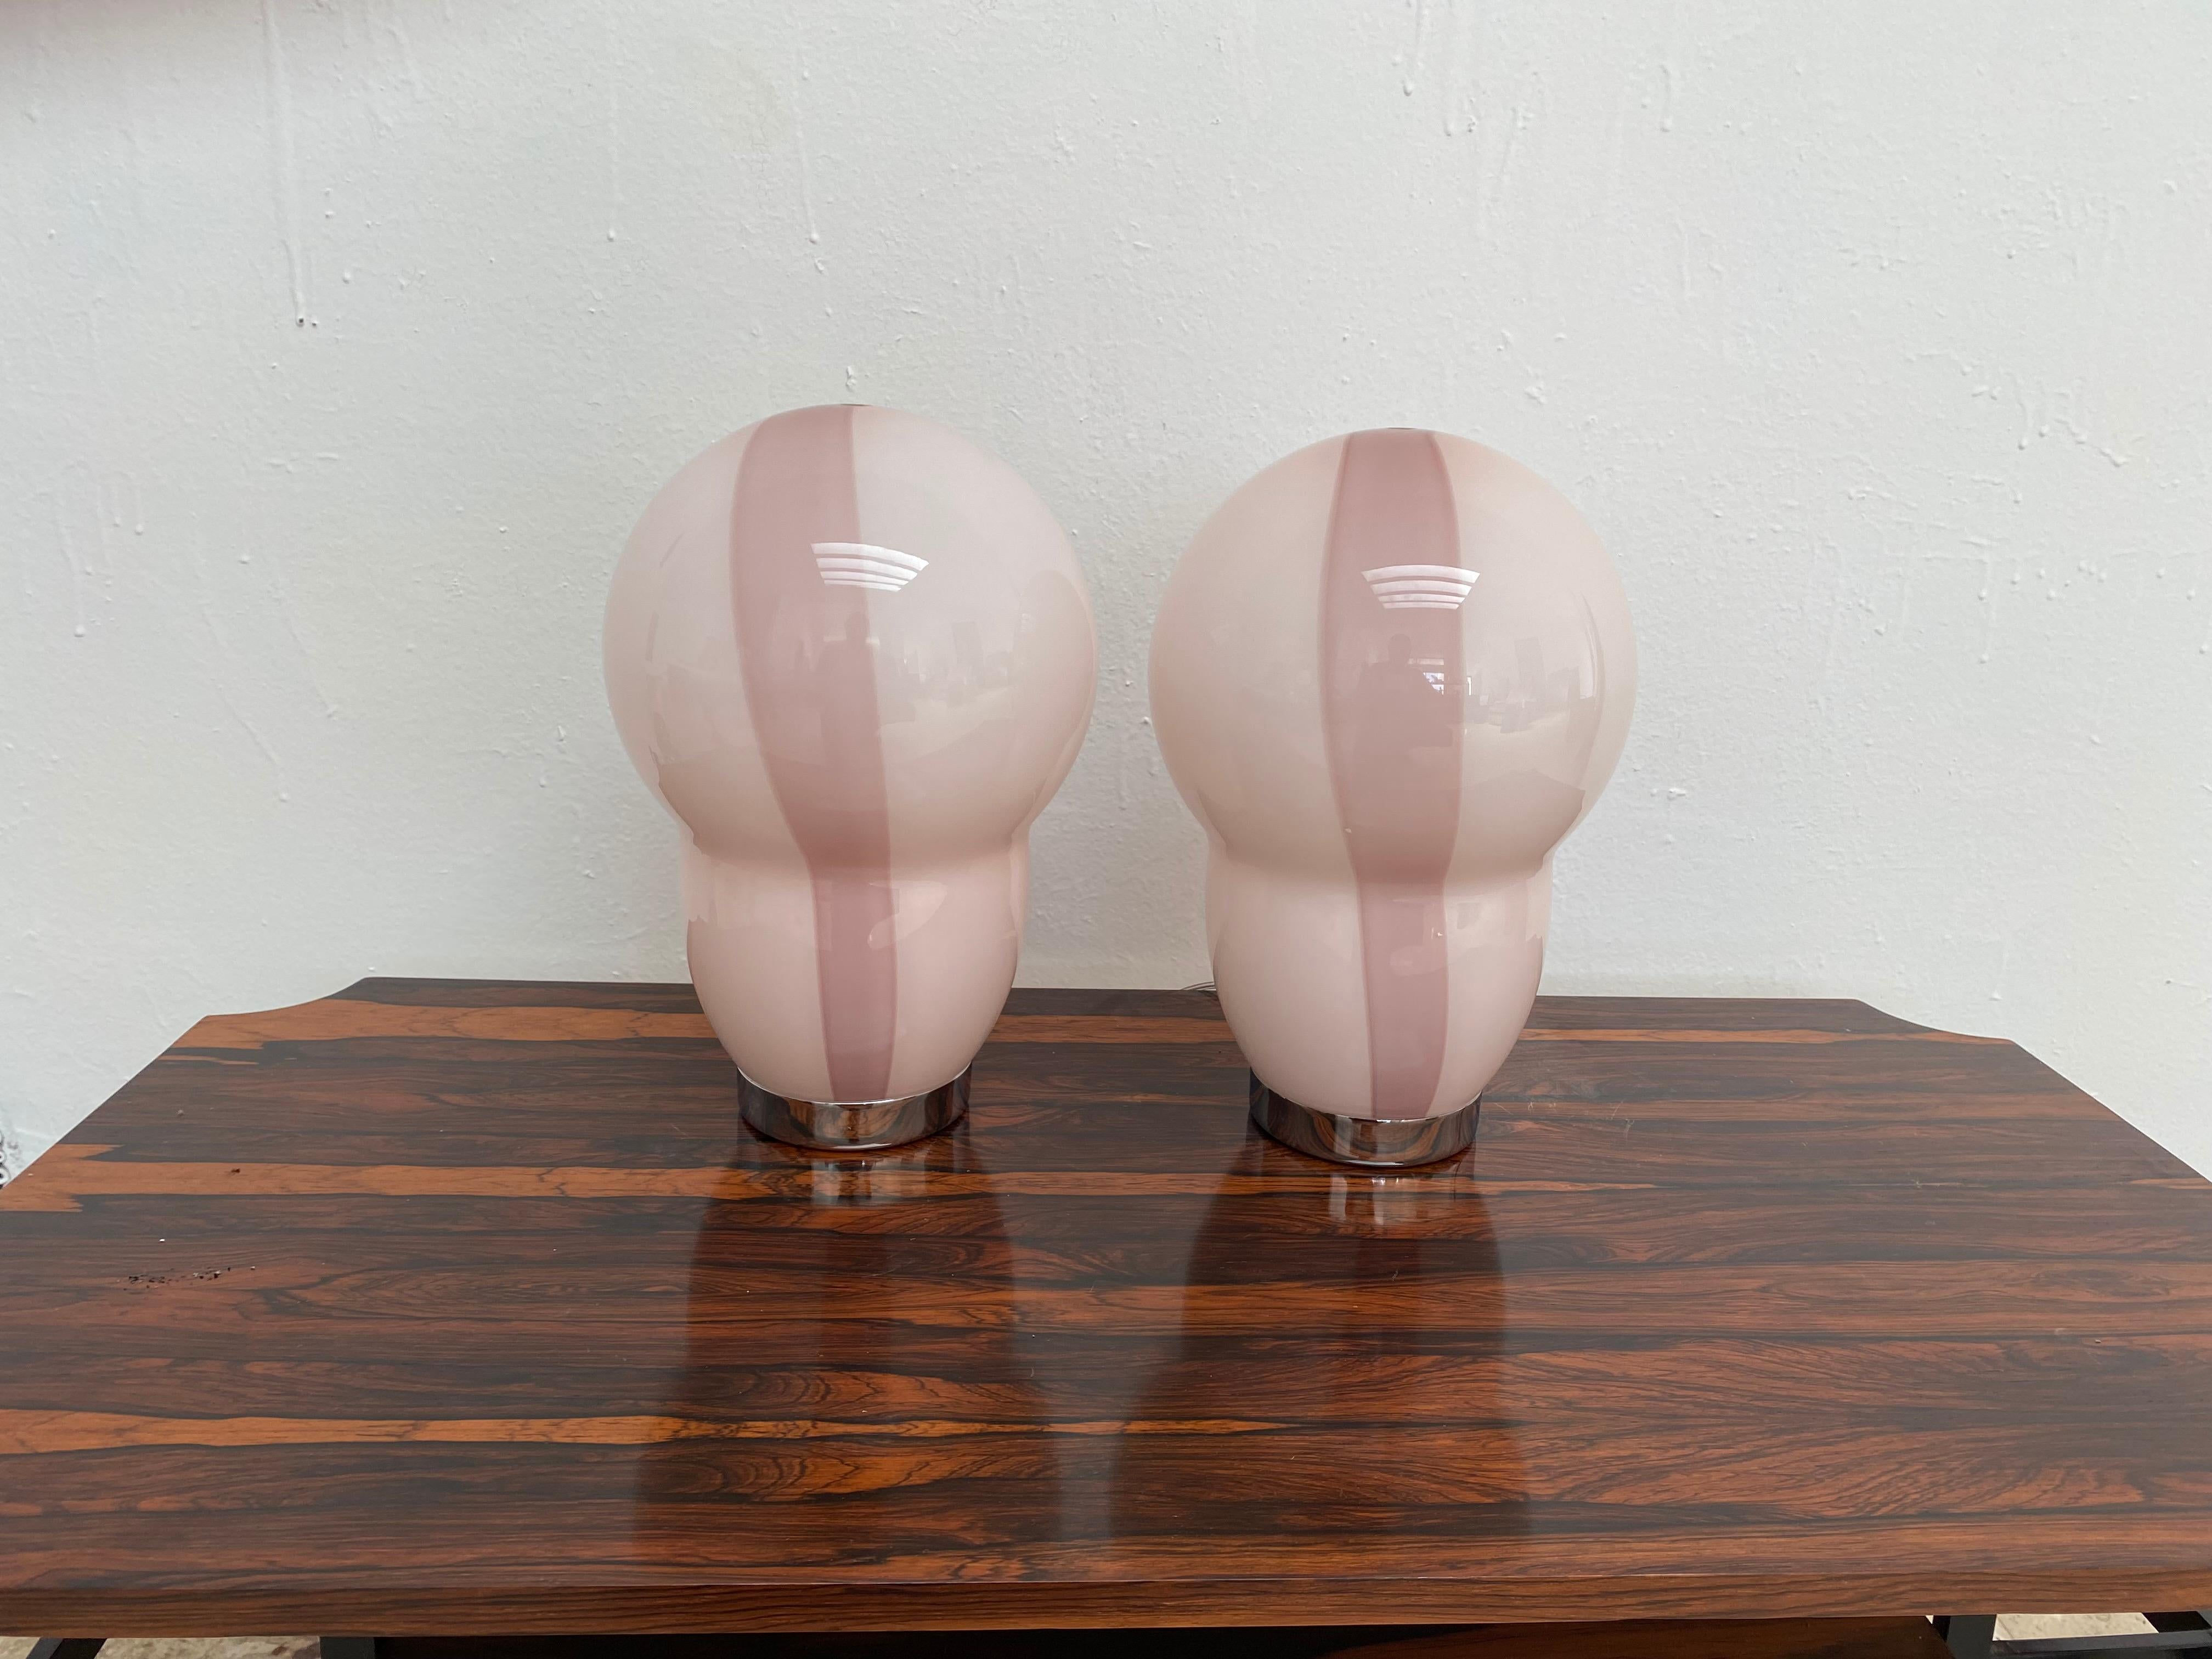 Beautiful table lamps in pink hand-blown murano glass.
Designed by Ettore Sottsass for Venini and manufactured in 1994.
The glass shade is signed 